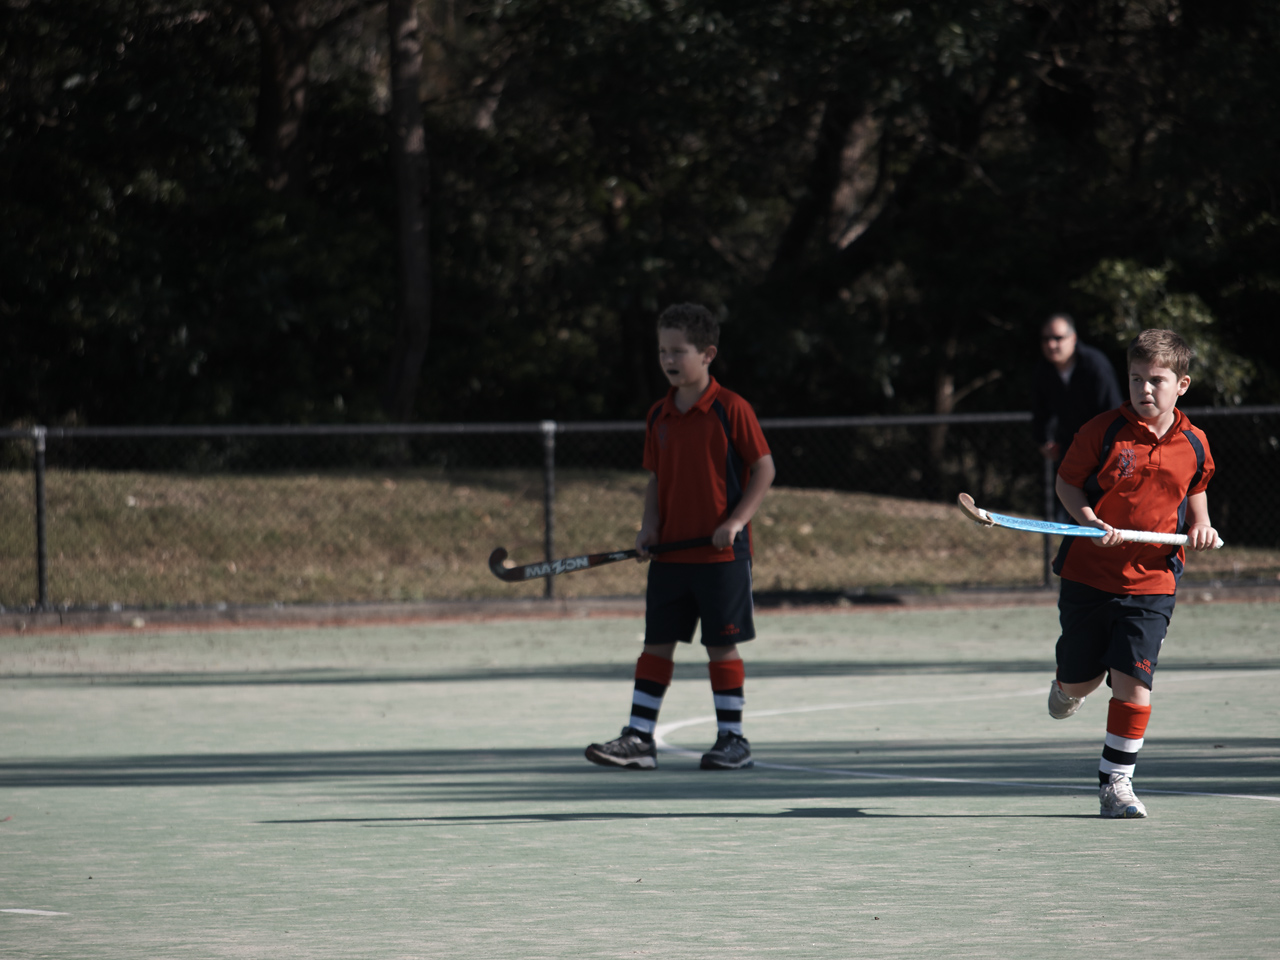 John and James playing in their last field hockey game of the season